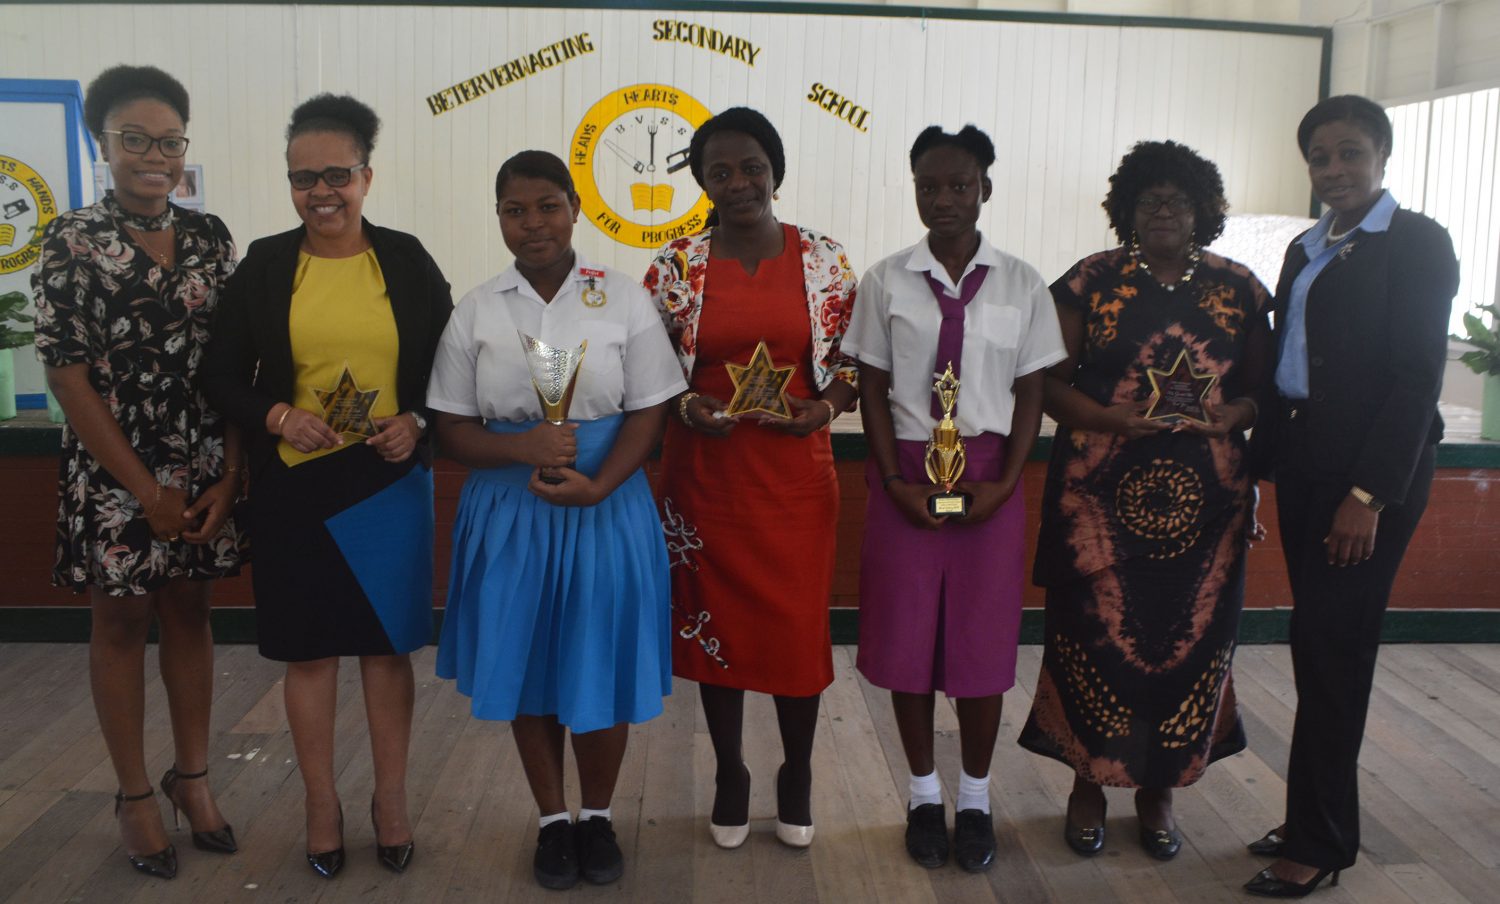 Those honoured at Region Four’s Black History Month event. From left are: CARICOM IKEMBA representative Onika Frank; Regional Executive Officer Pauline Lucas; Beterverwagting student Danelle Goddette; Regional Education Officer Tiffany Favourite-Harvey; La Bonne Intention student Shenelle Harris; Regional Chairperson Genevieve Allen; and Director of Youth Gillian Frank.
